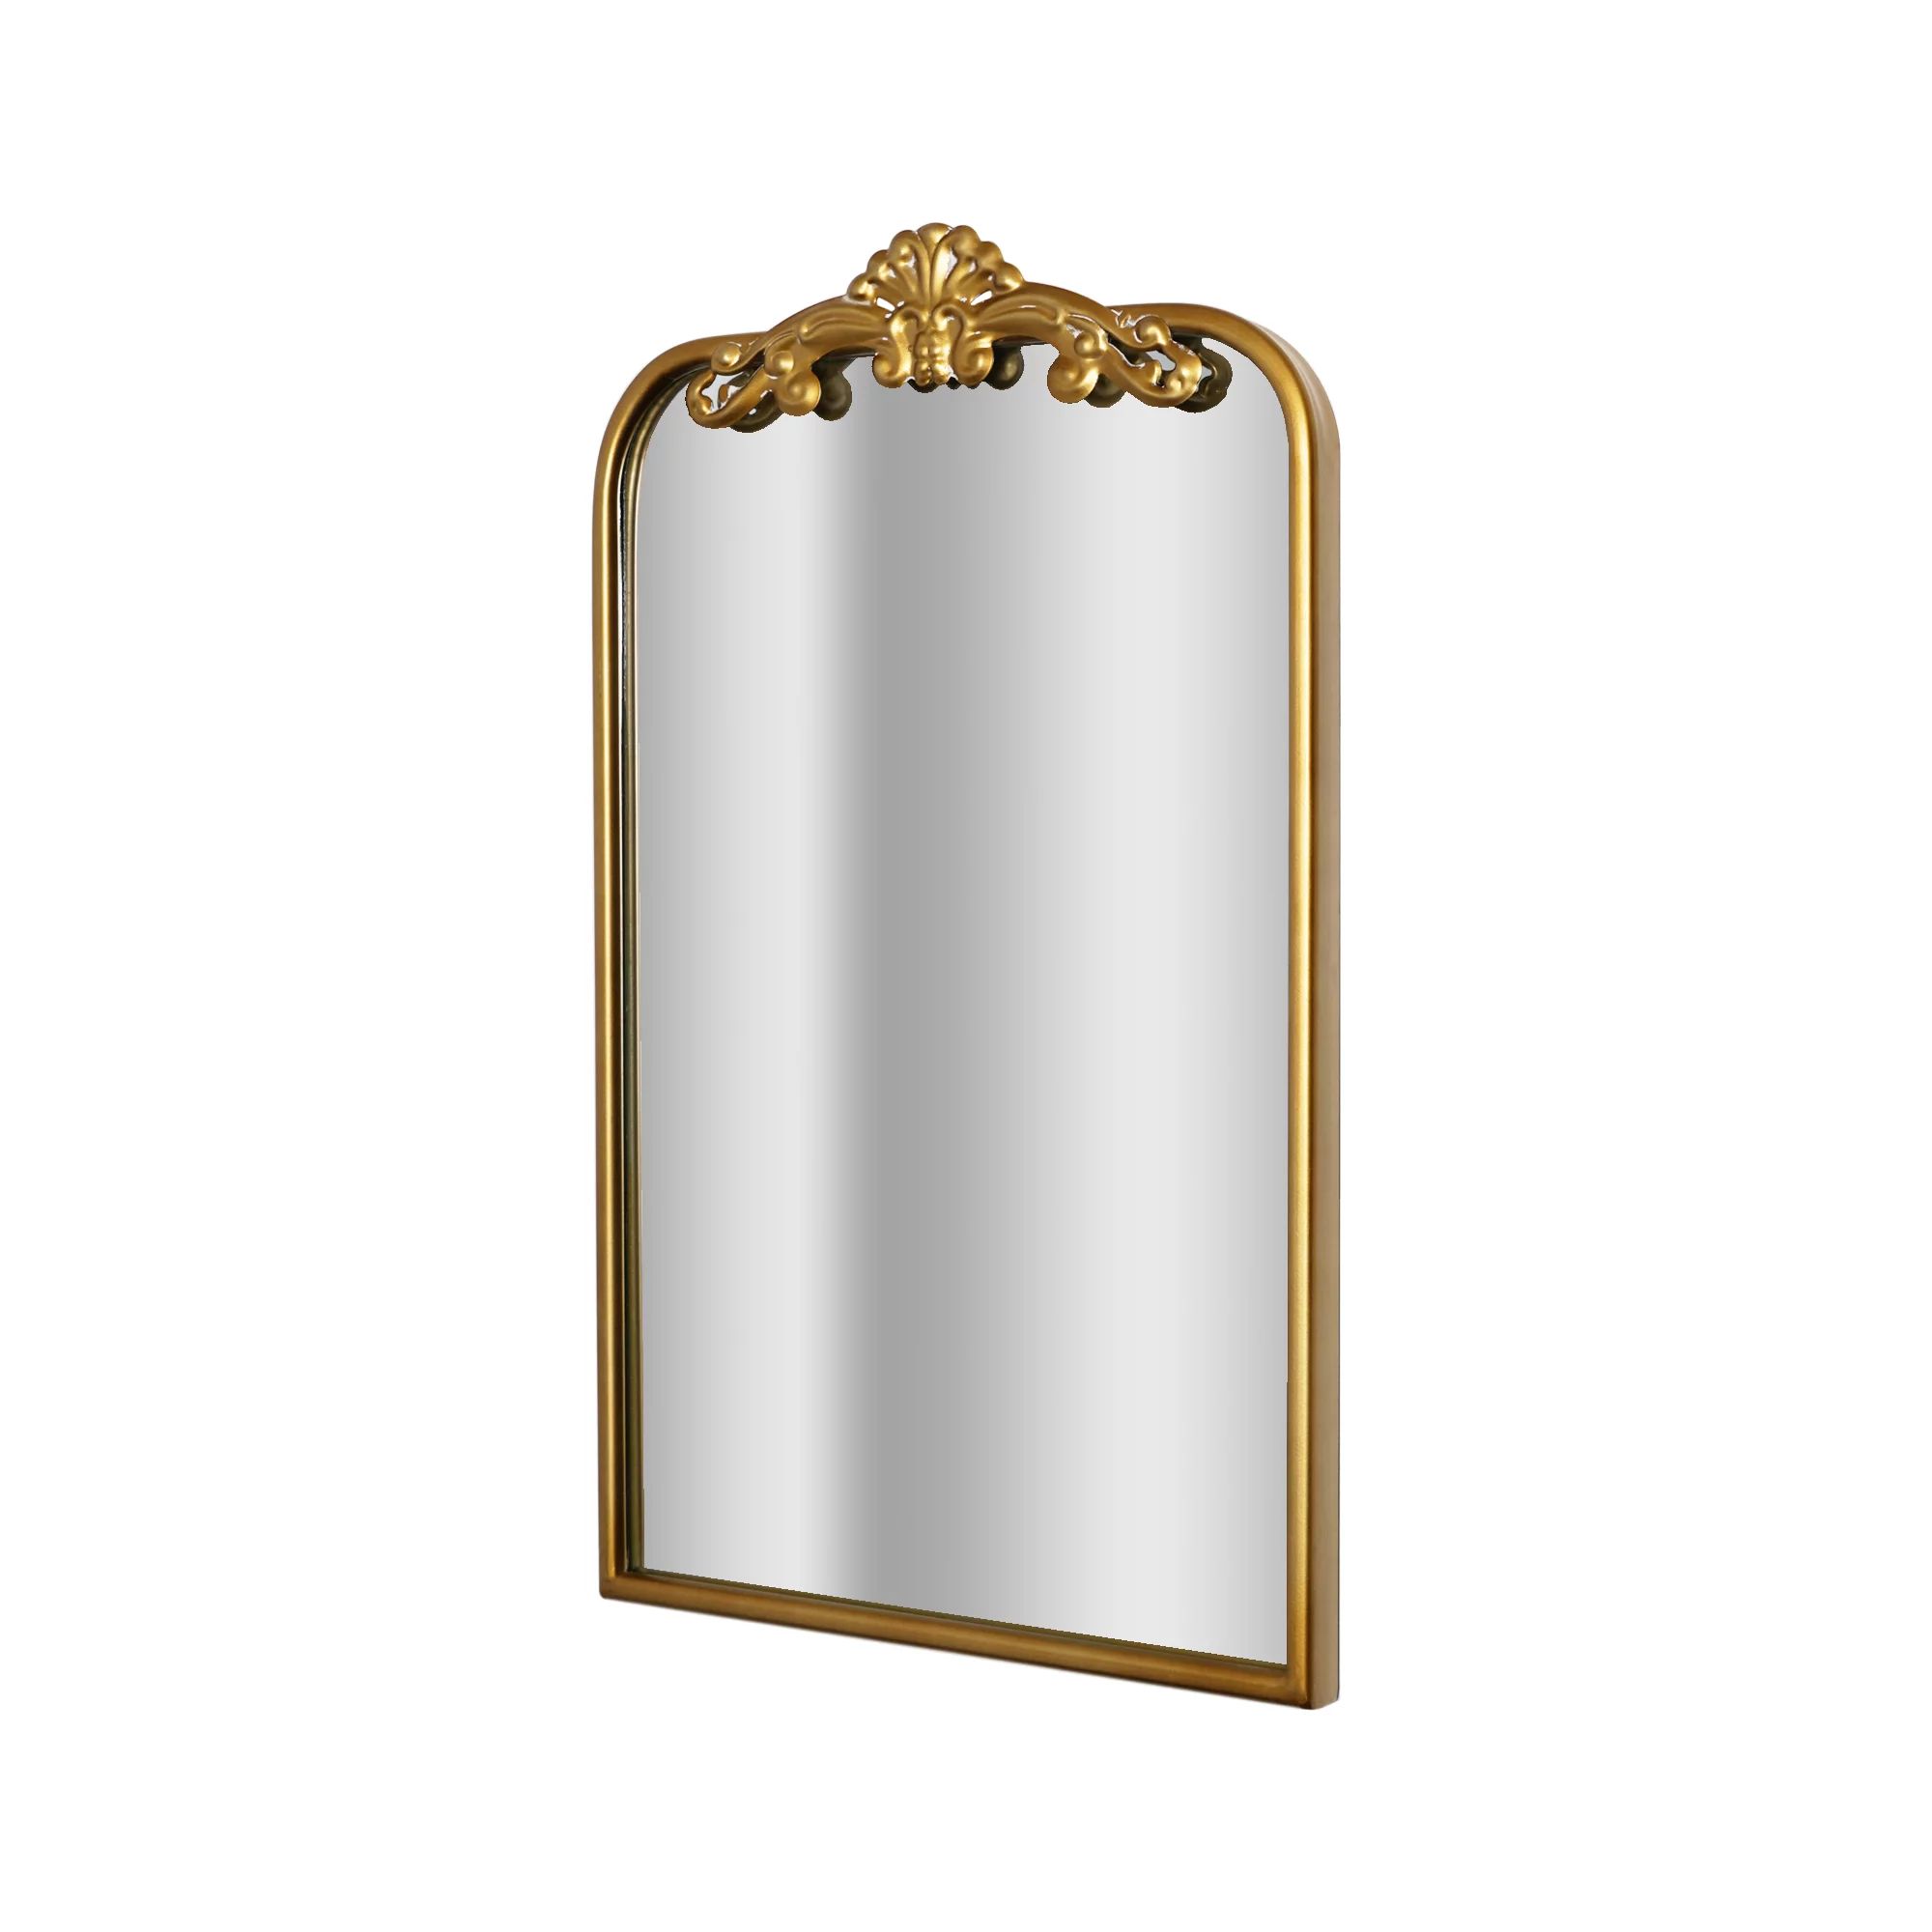 Gold Rectangle Metal Vintage-Inspired Ornate Decorative Vanity Wall Mirror with Distressed White ... | Walmart (US)